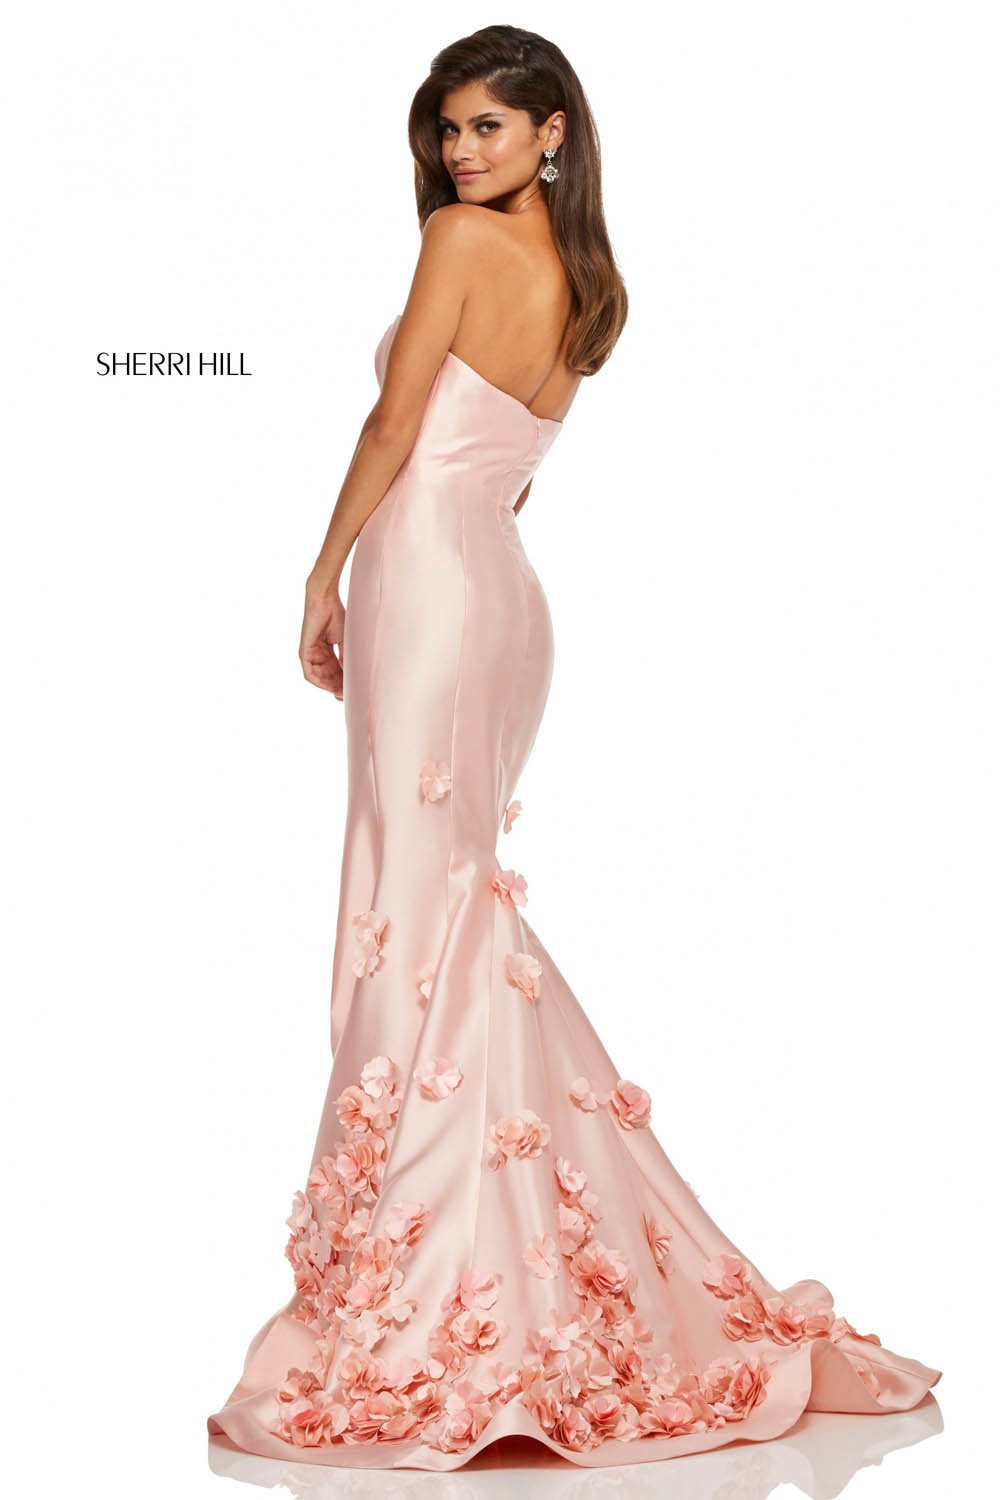 Sherri Hill 52744 dress images in these colors: Light Blue, Yellow, Black, Red, Ivory, Blush.